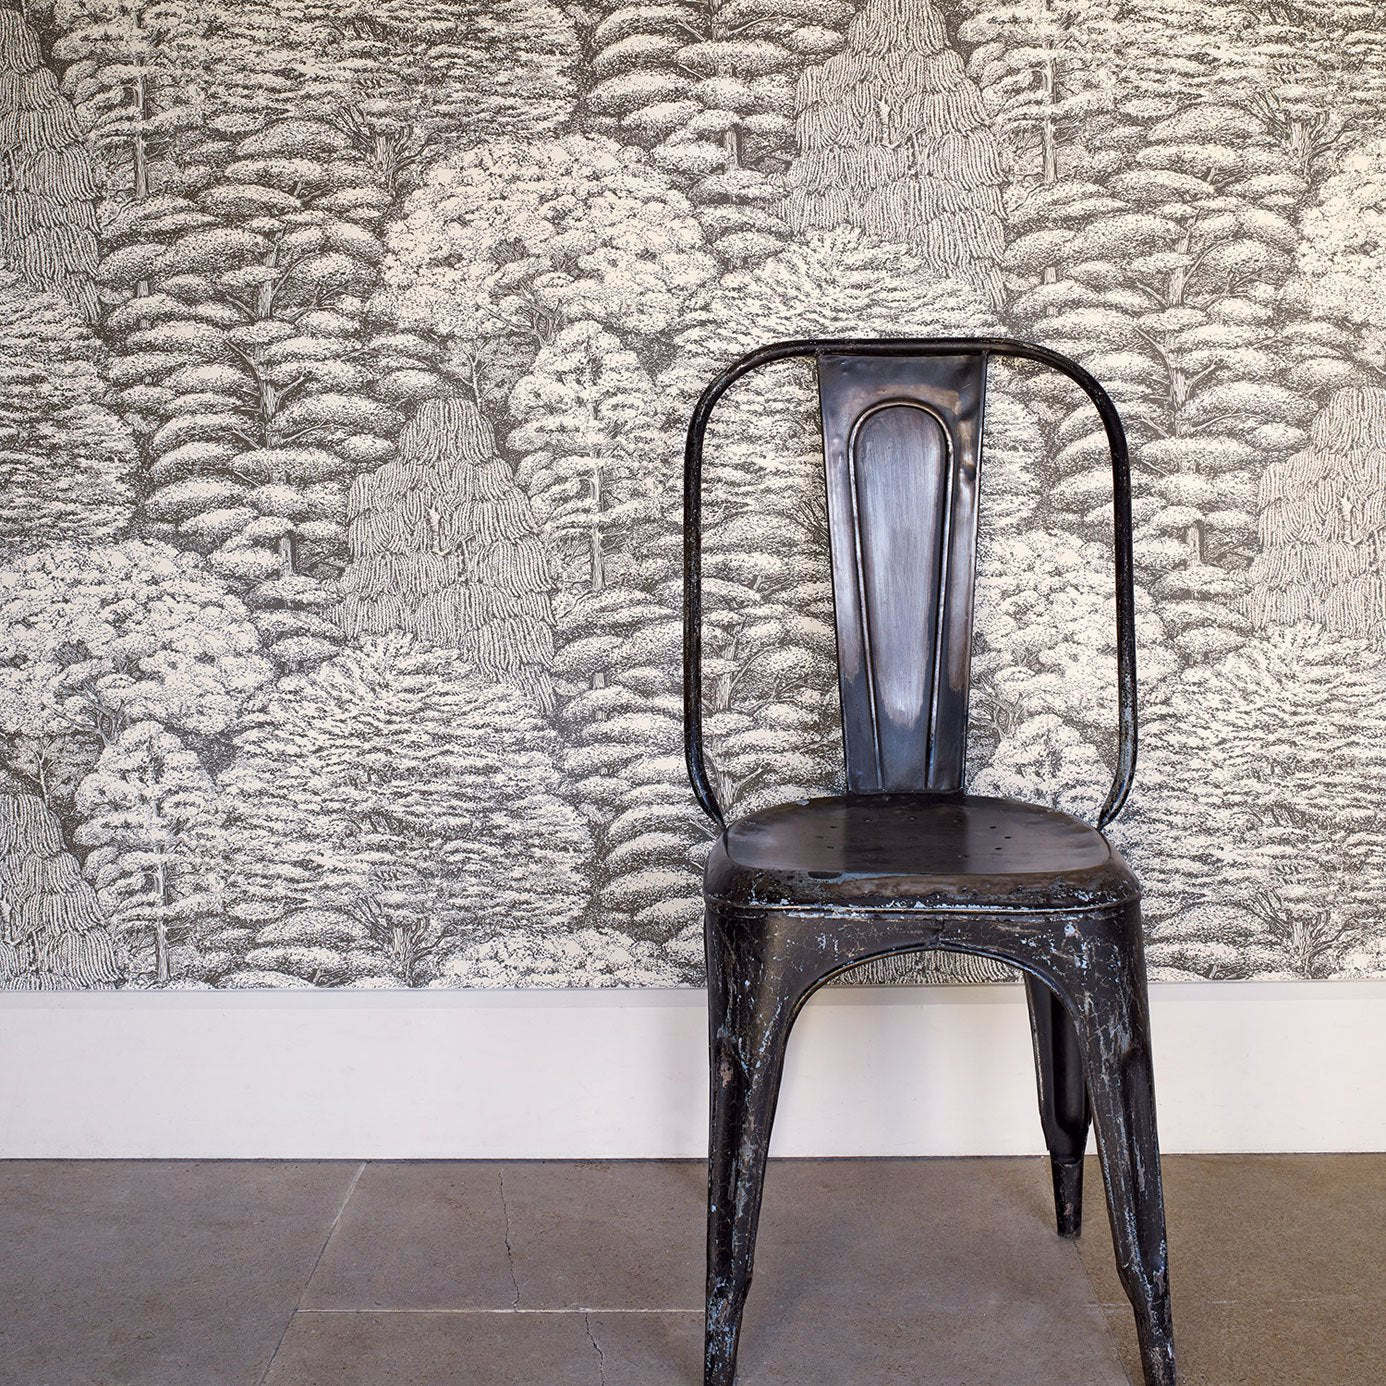 Woodland Toile Ivory/Charcoal Room Wallpaper